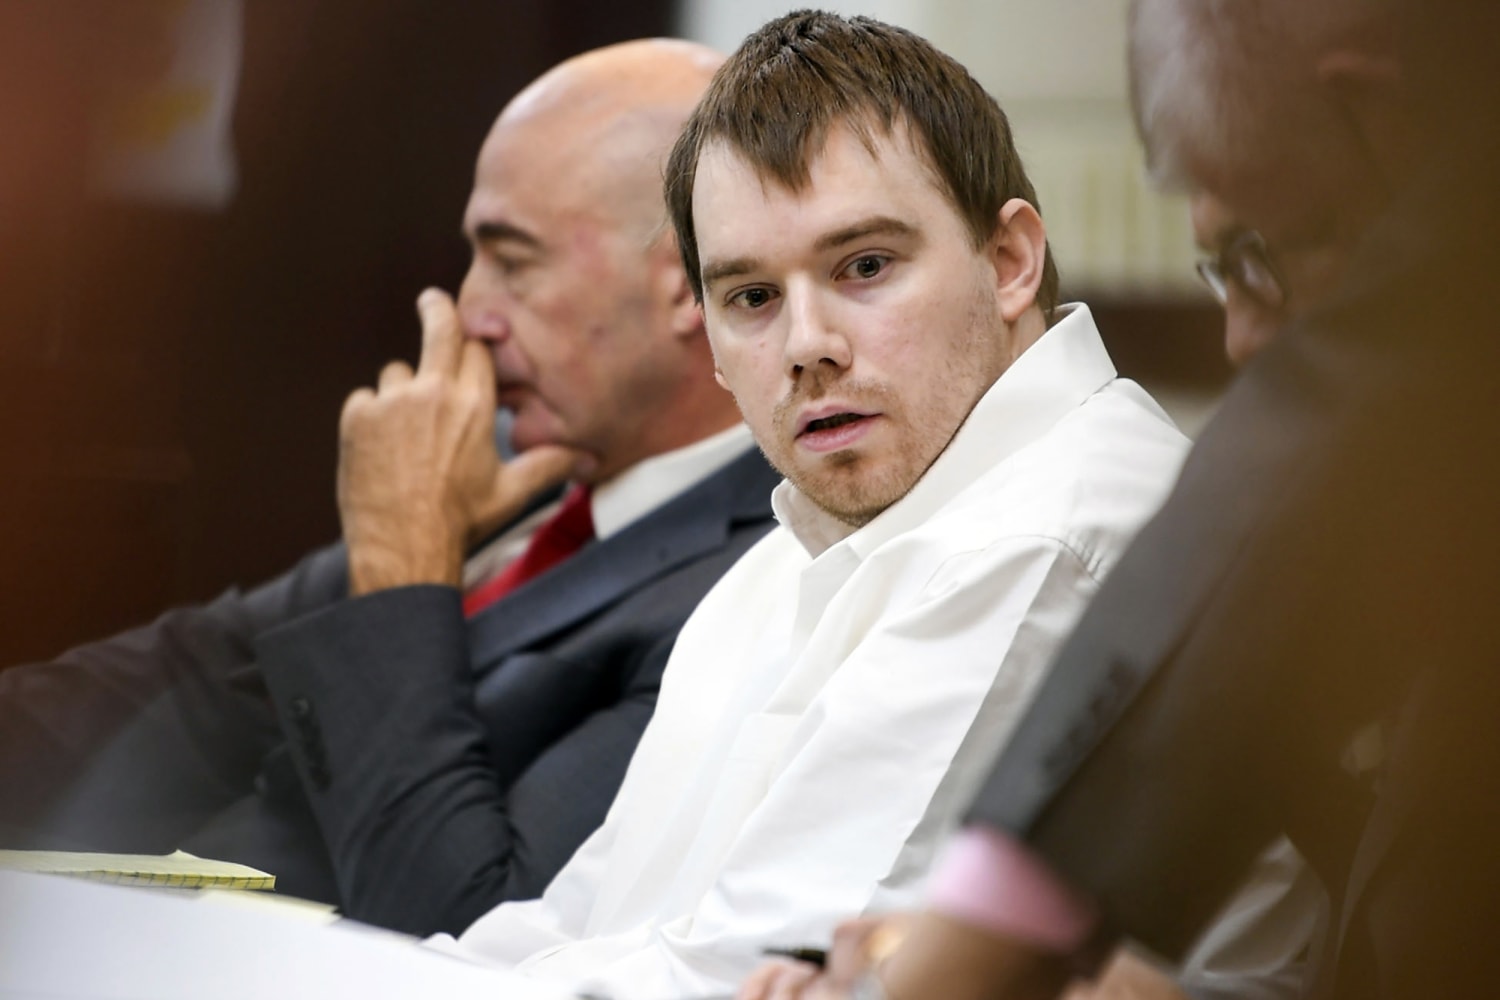 Tennessee Waffle House Shooter Sentenced to Life in Prison Without Parole for 2018 Attack That Killed Four People